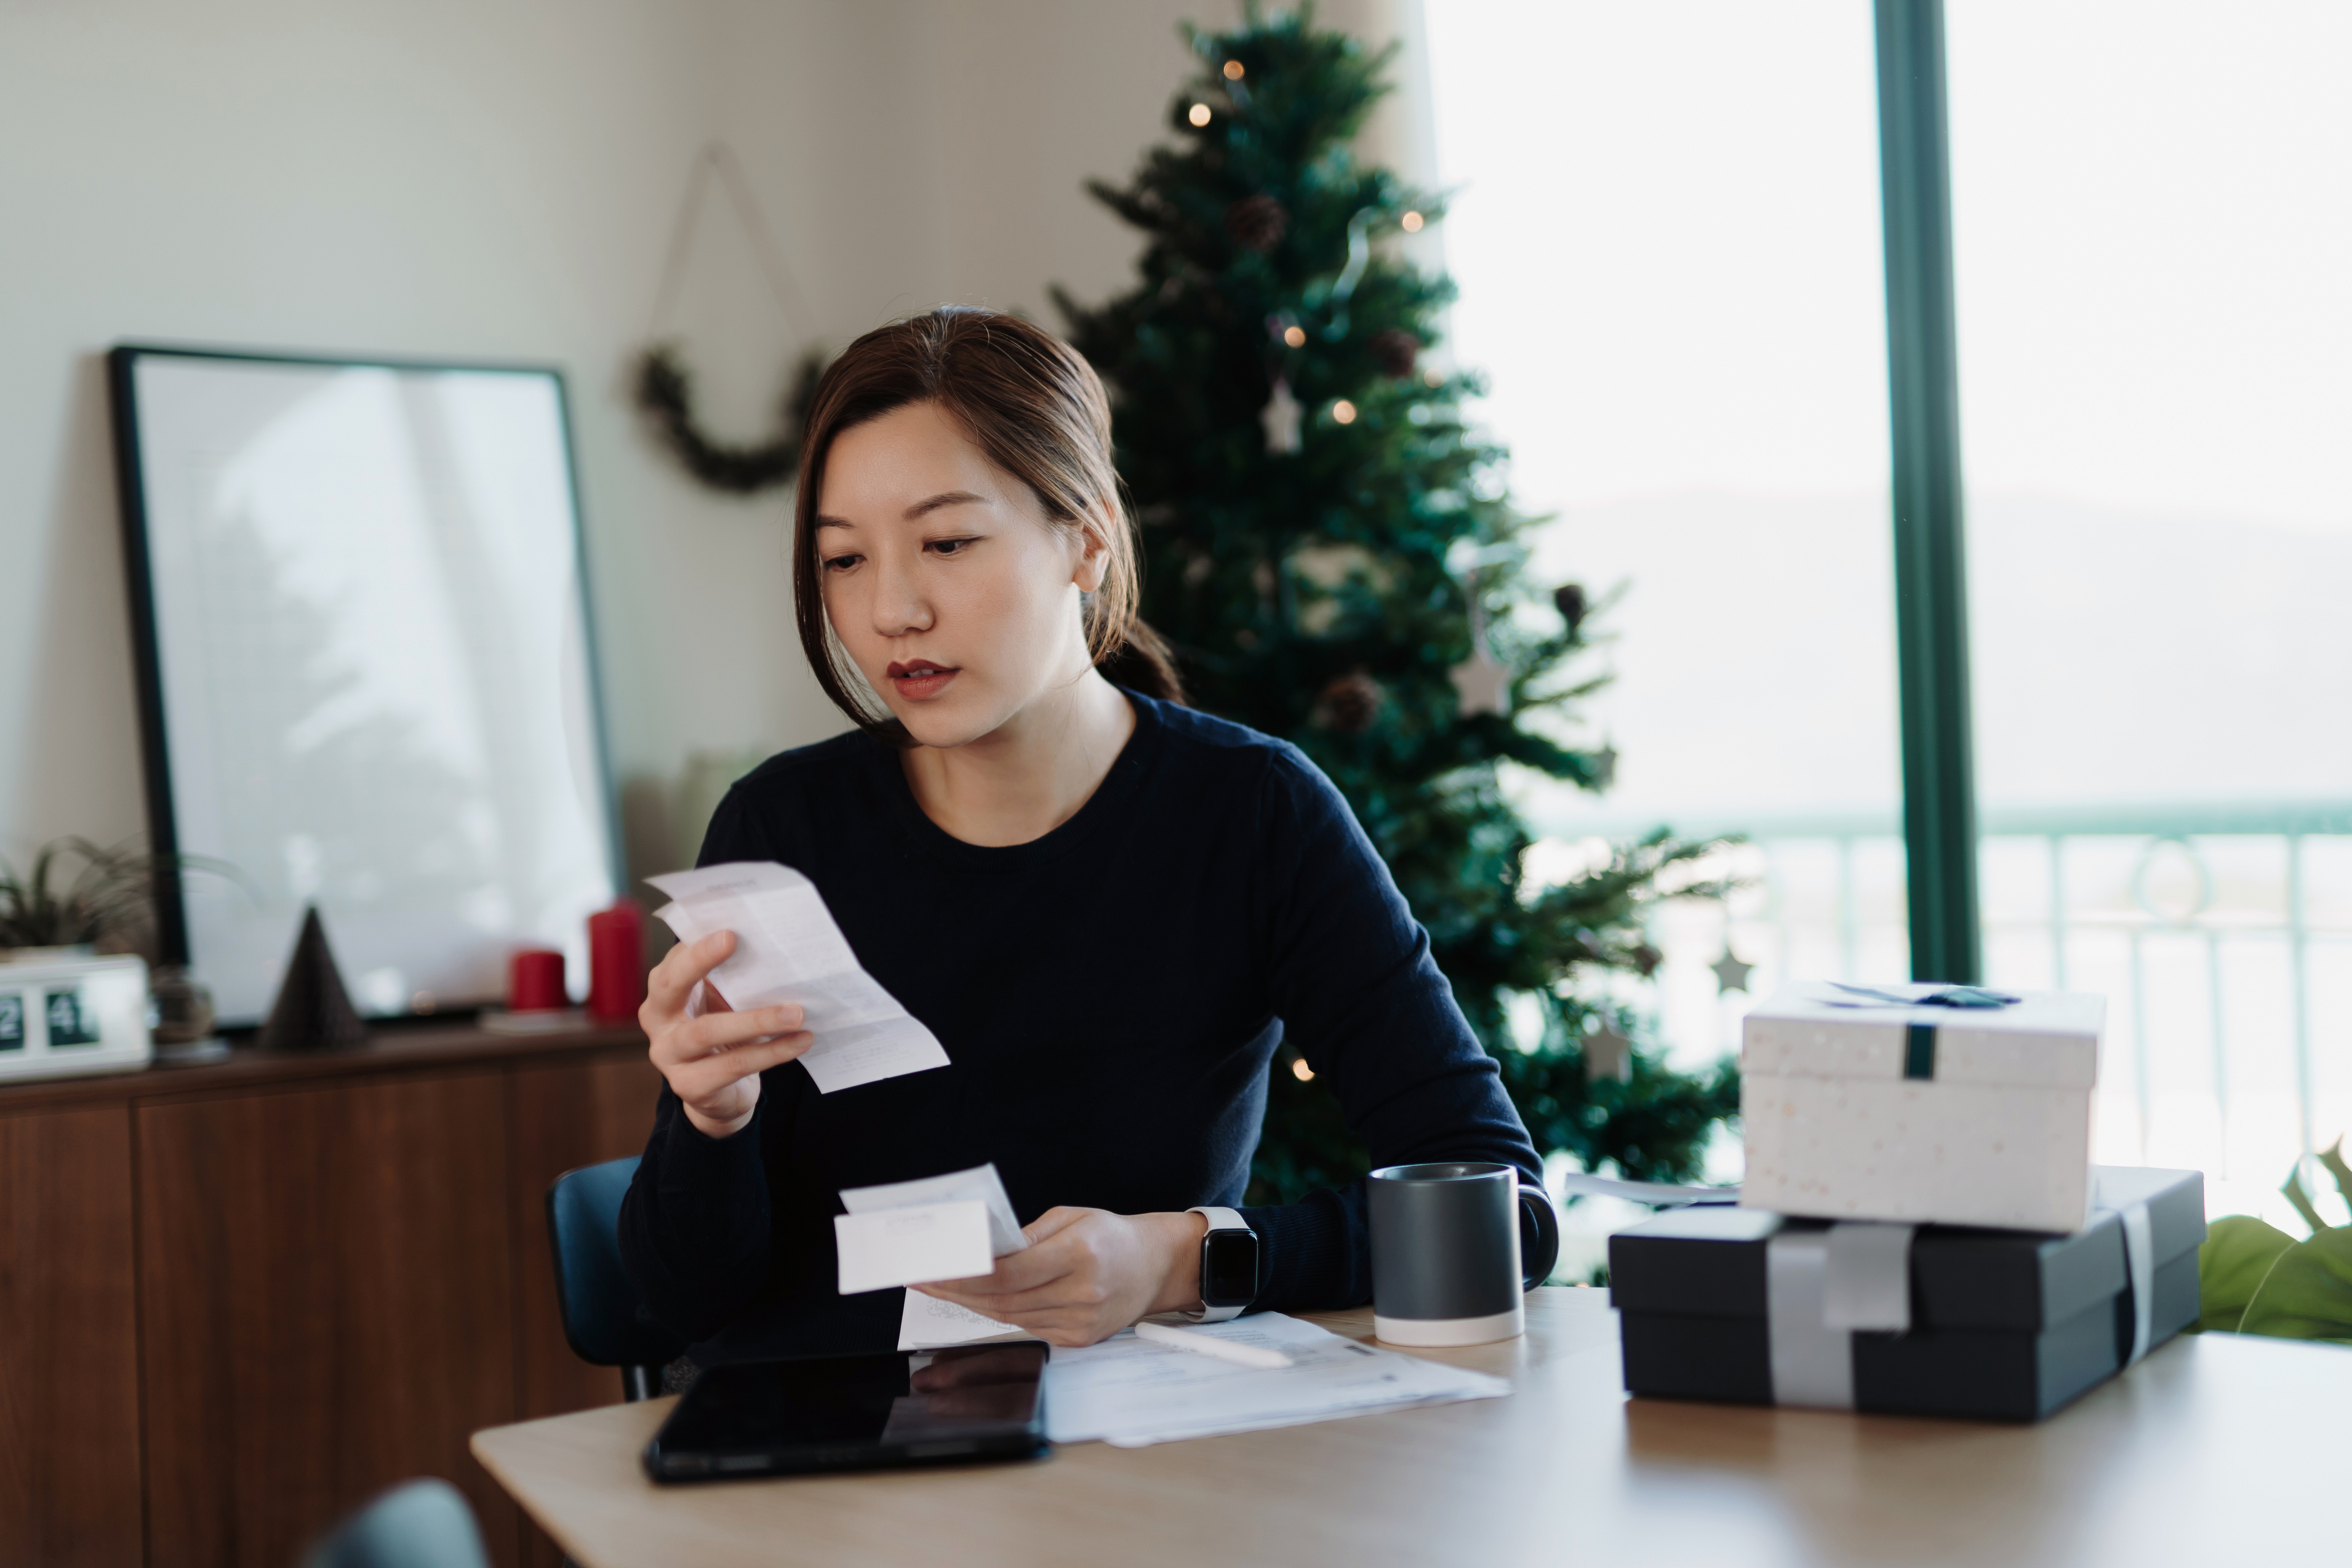 Woman reviewing financial documents at a desk with gift boxes nearby